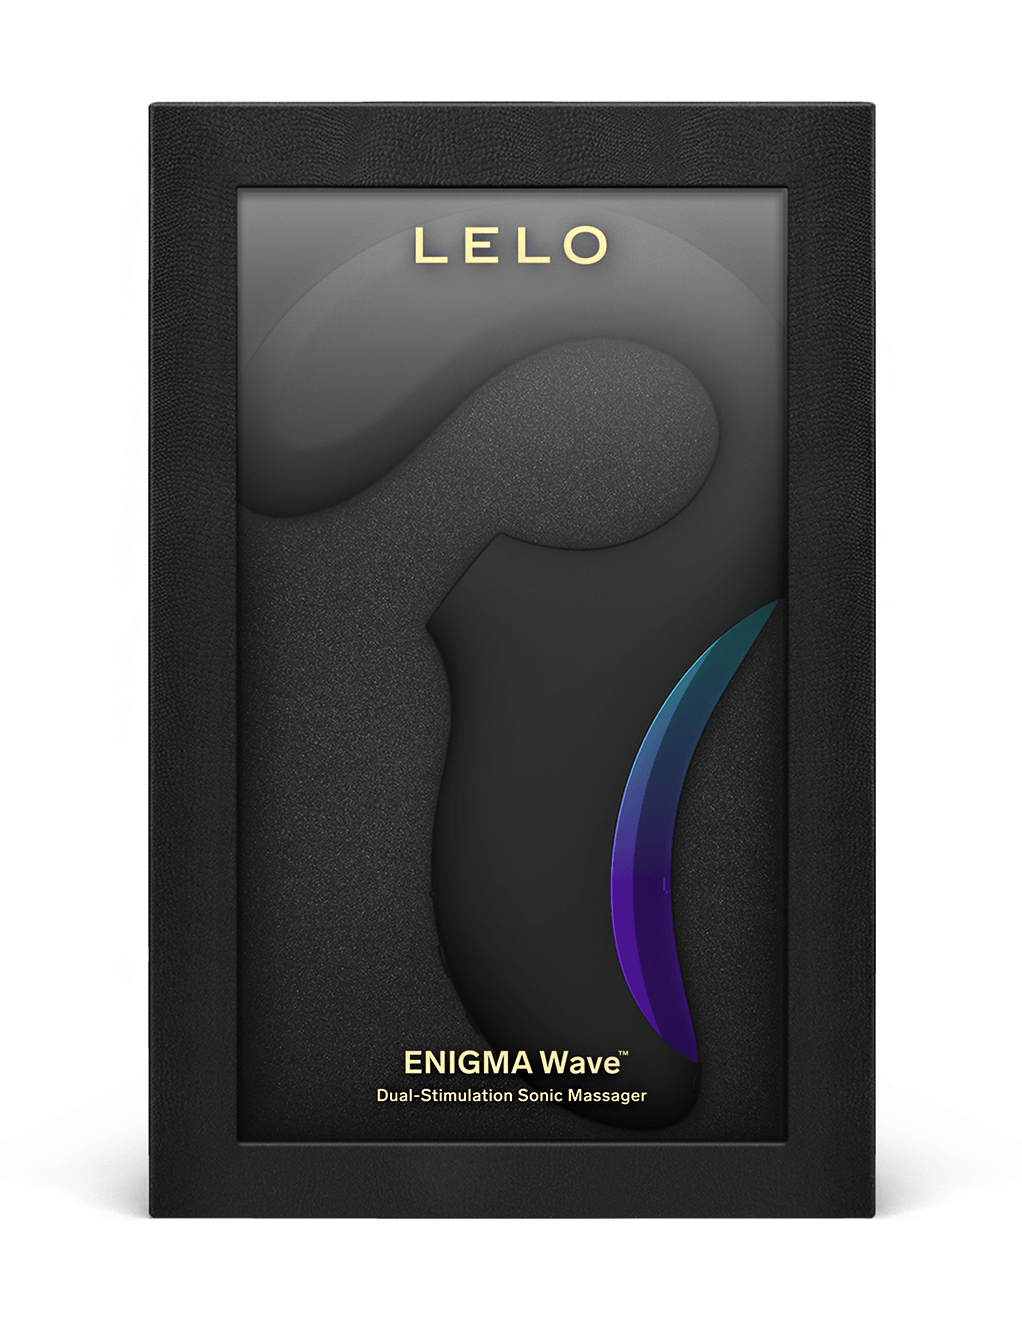 Lelo Enigma Wave - Black - Box Front w/Product